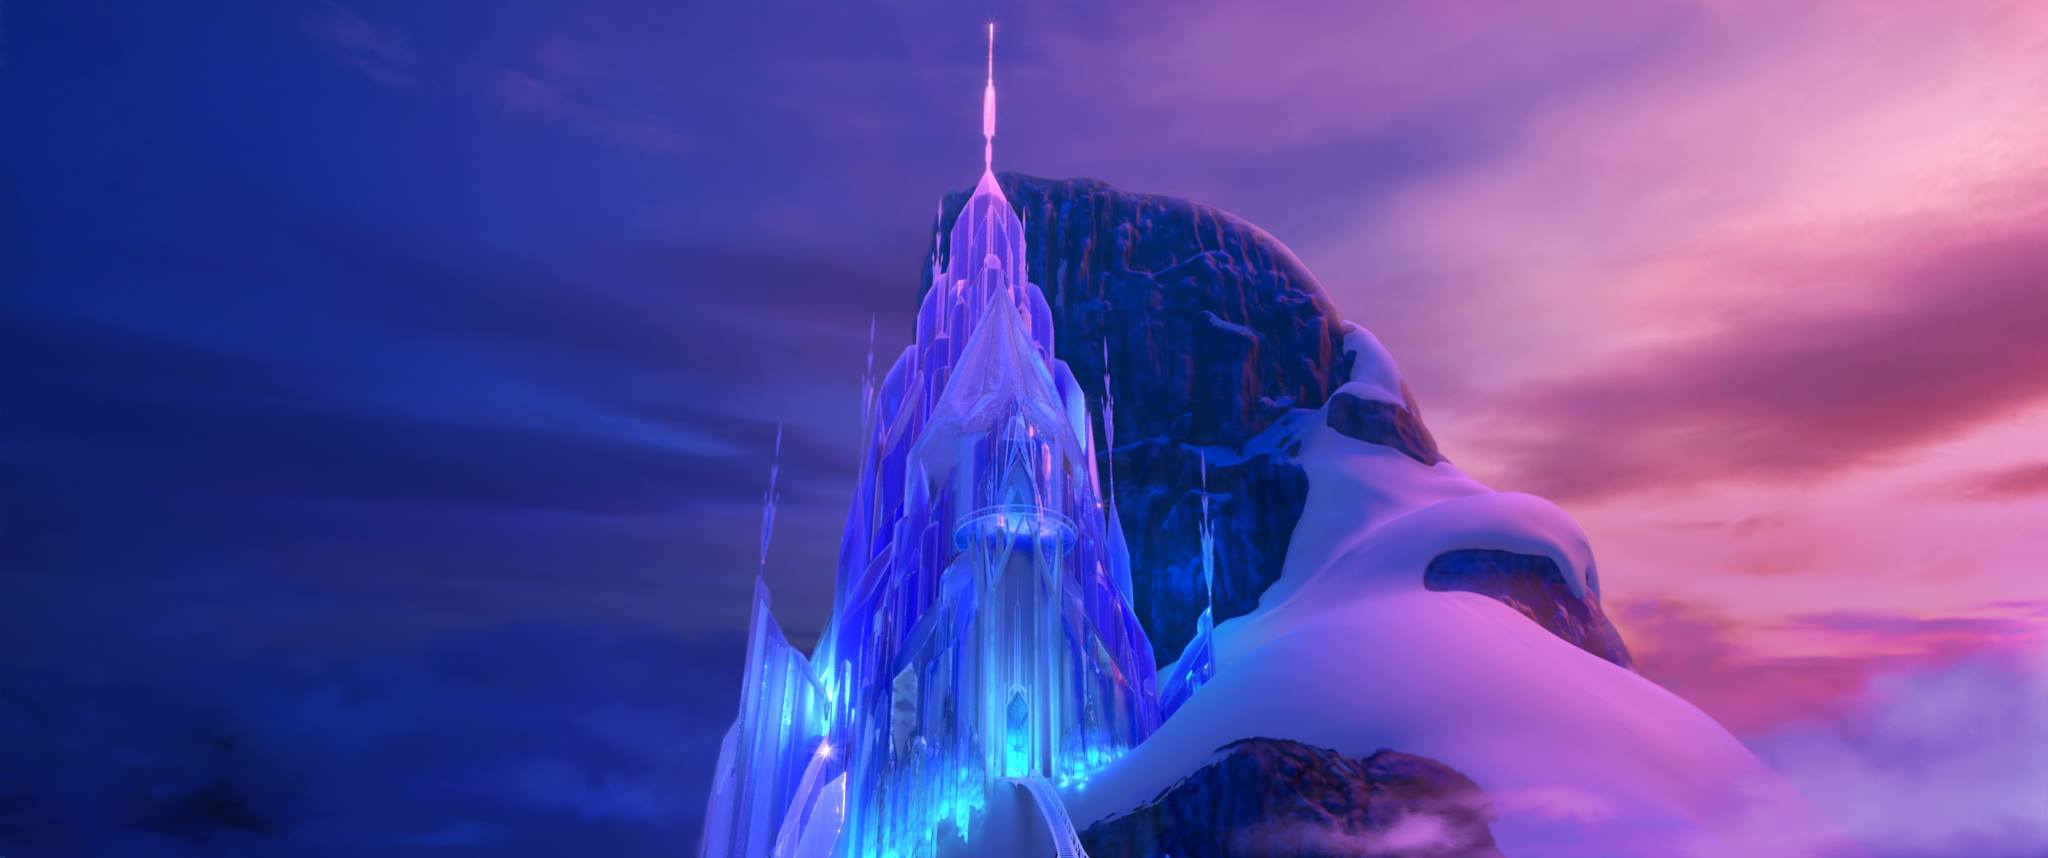 New Frozen Image Show Off Elsa S Ice Palace Arendelle More